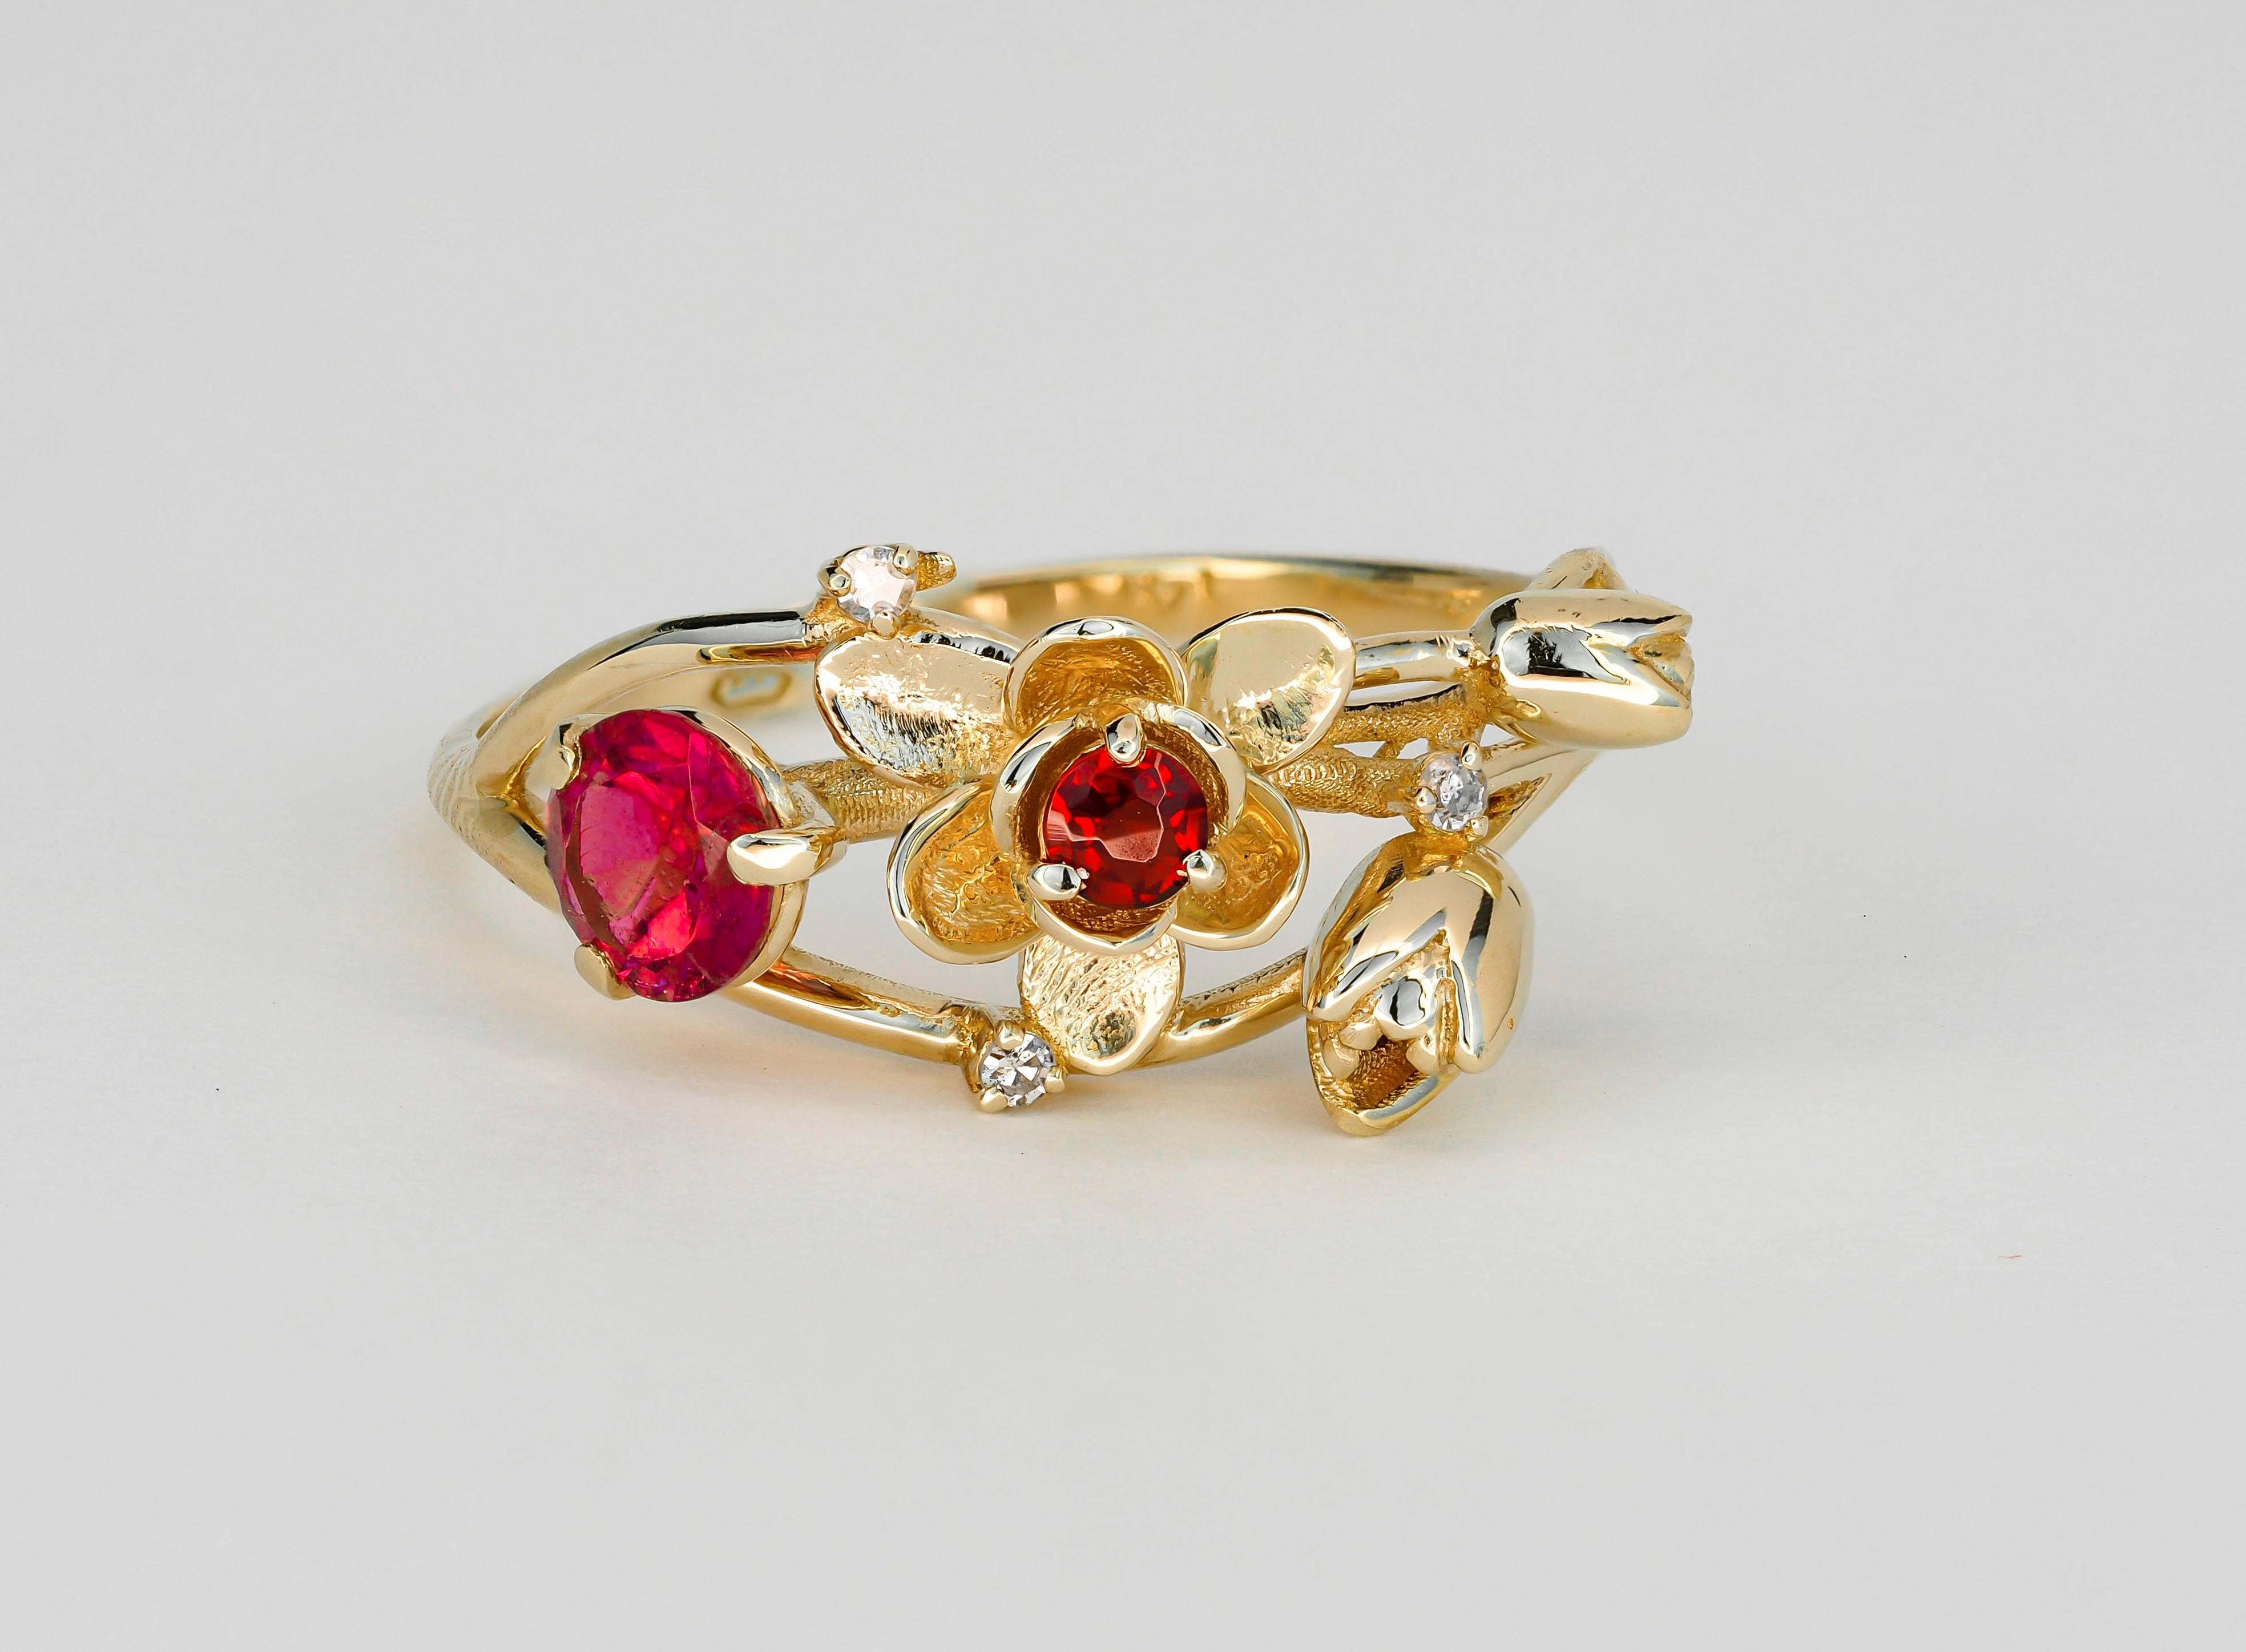 For Sale:  Ruby ring. 14k Gold Ring with Ruby, Garnet and Diamonds. Orchid Flower Ring. 3